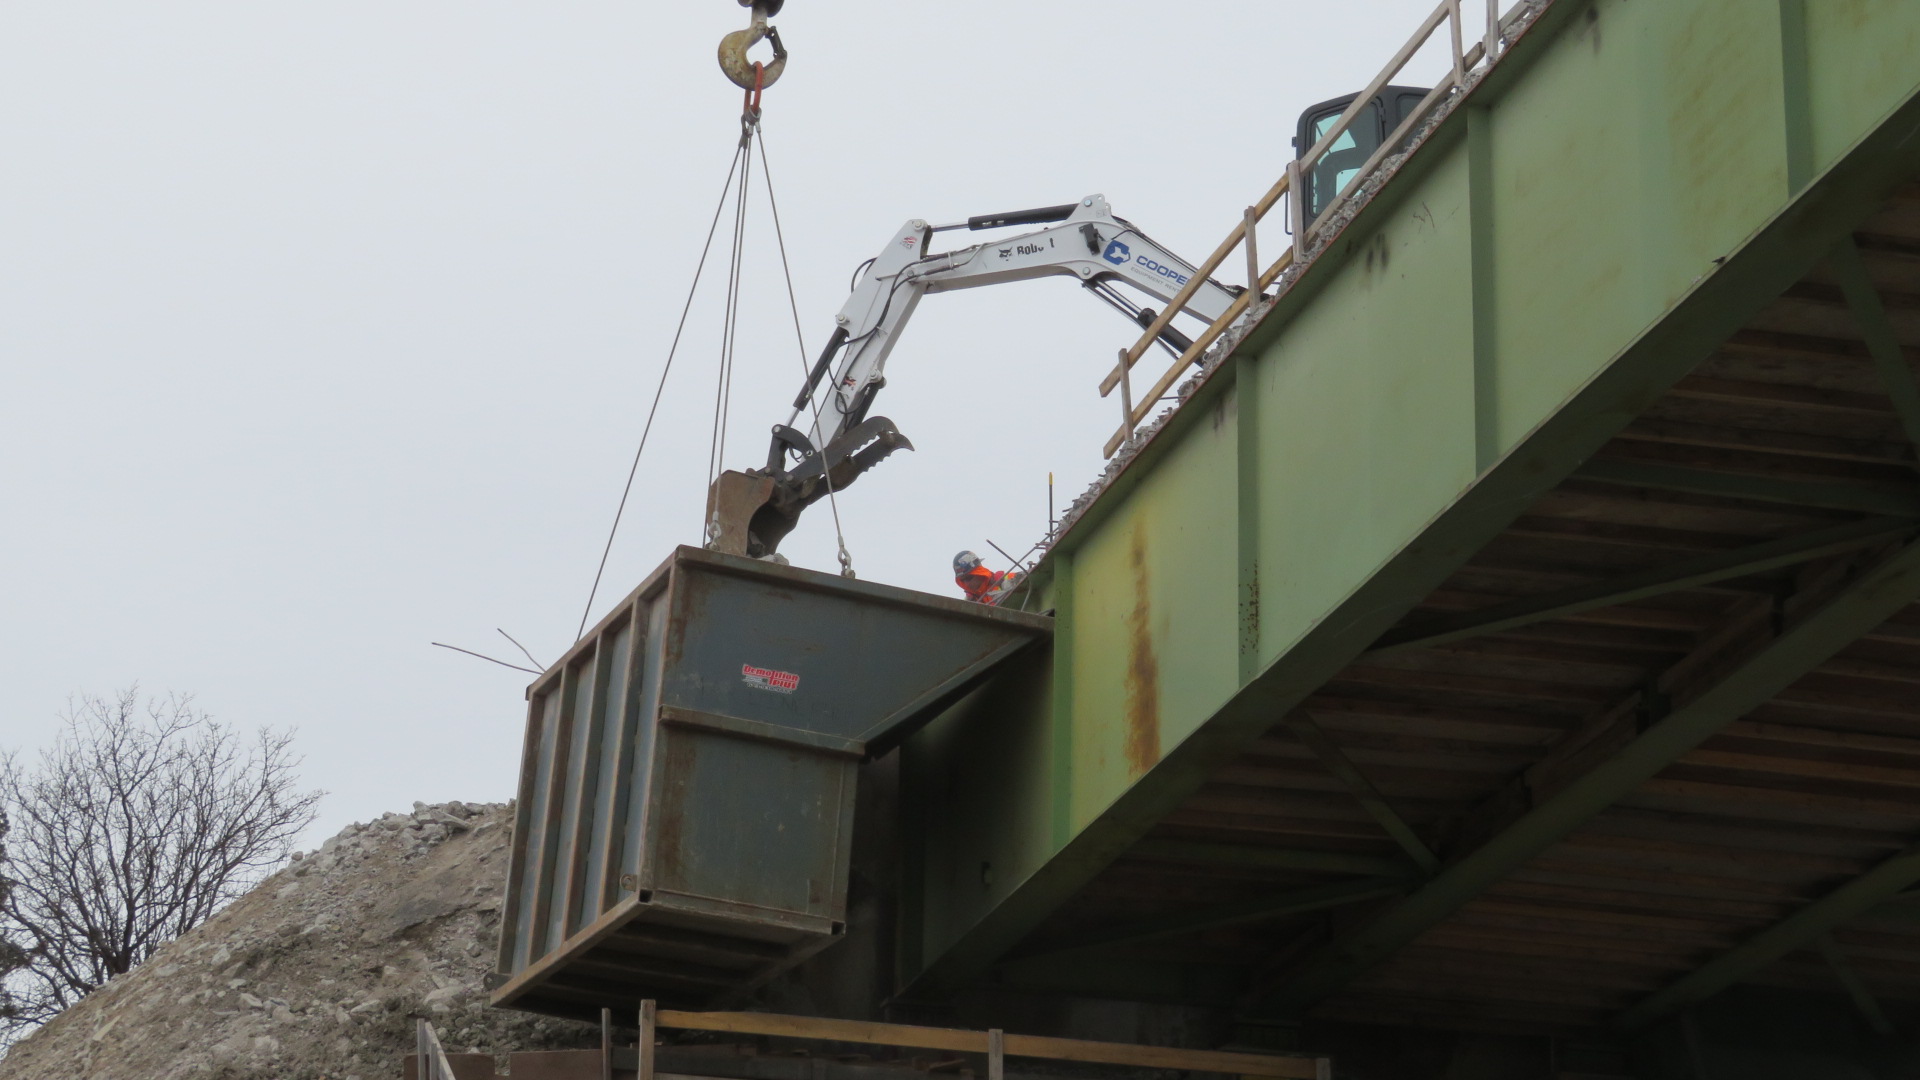 View from below, excavator removing debris into the containment bin